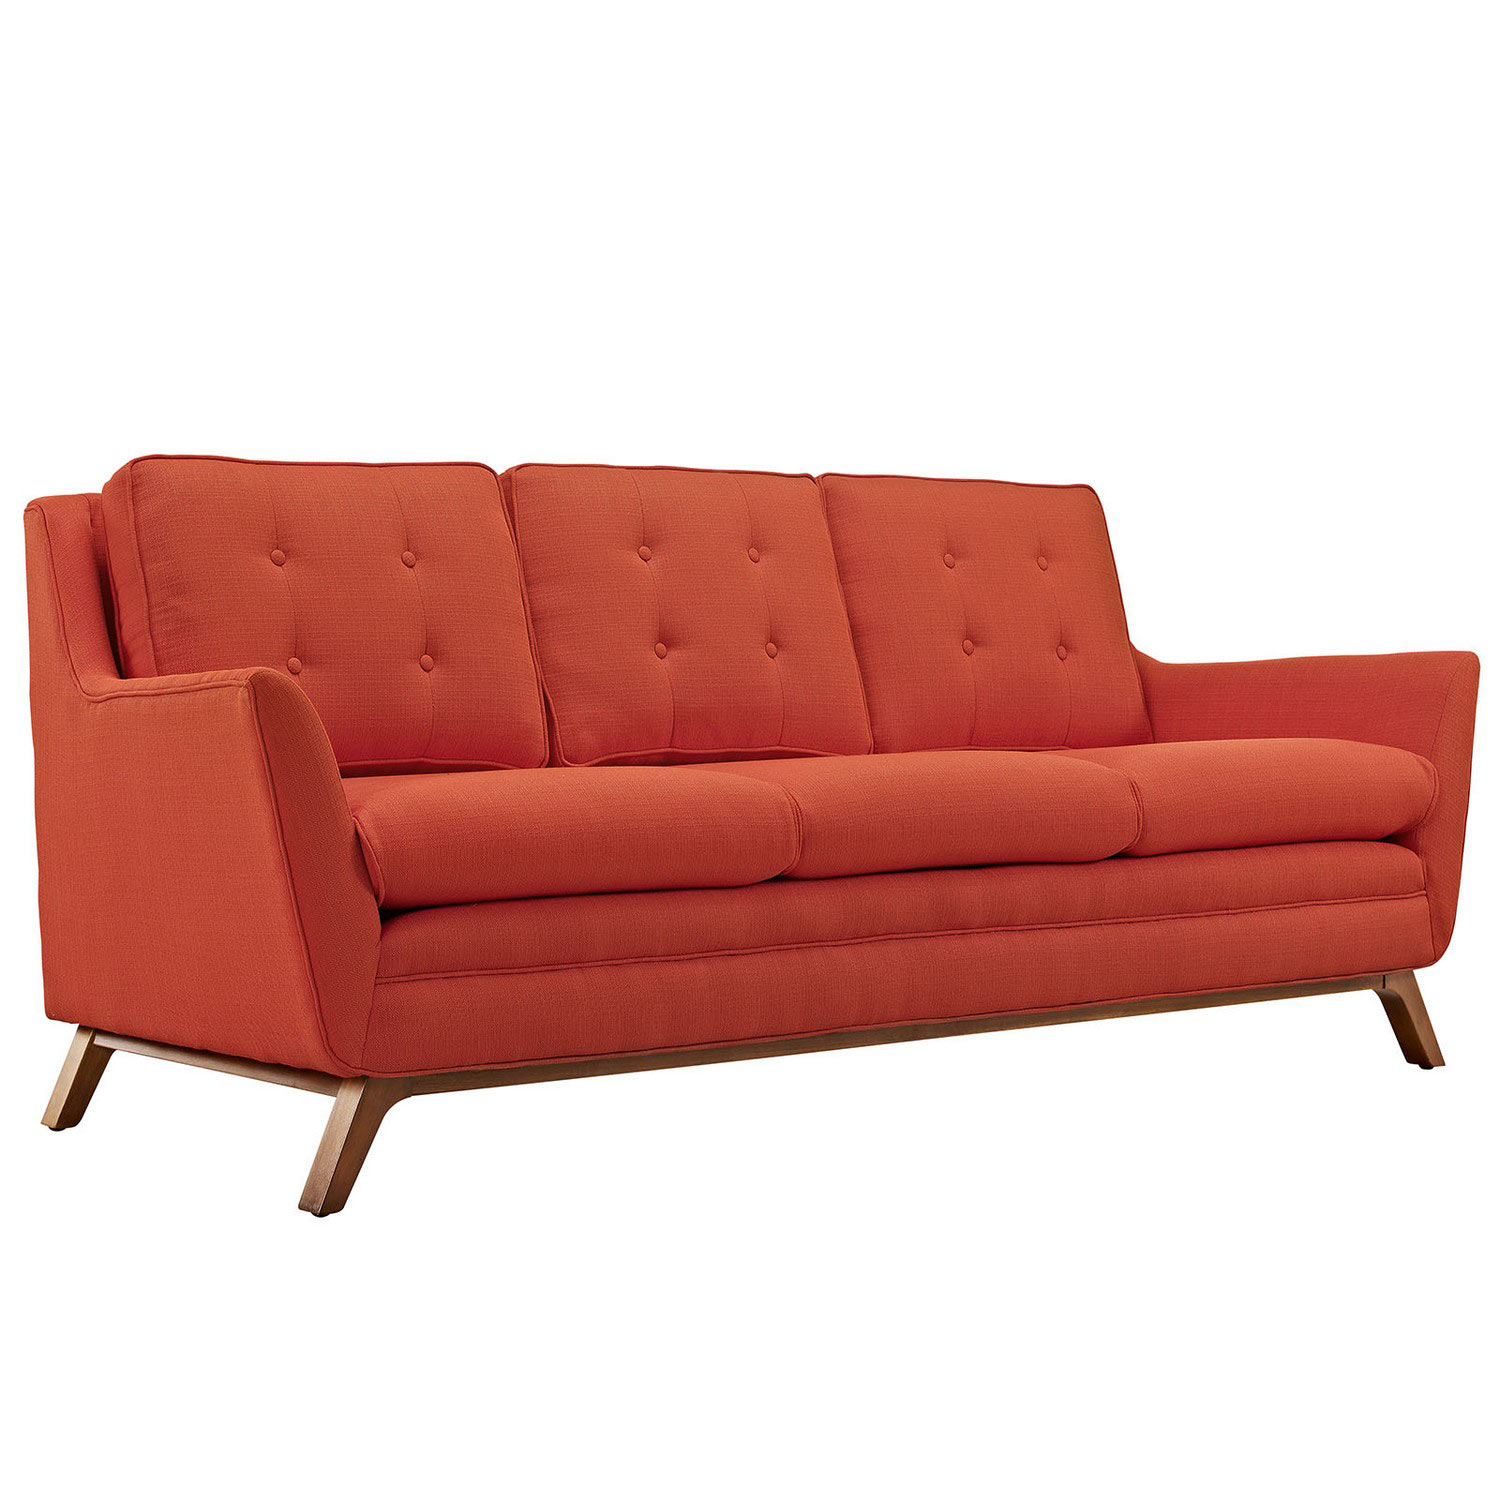 Modway Beguile Fabric Sofa - Atomic Red